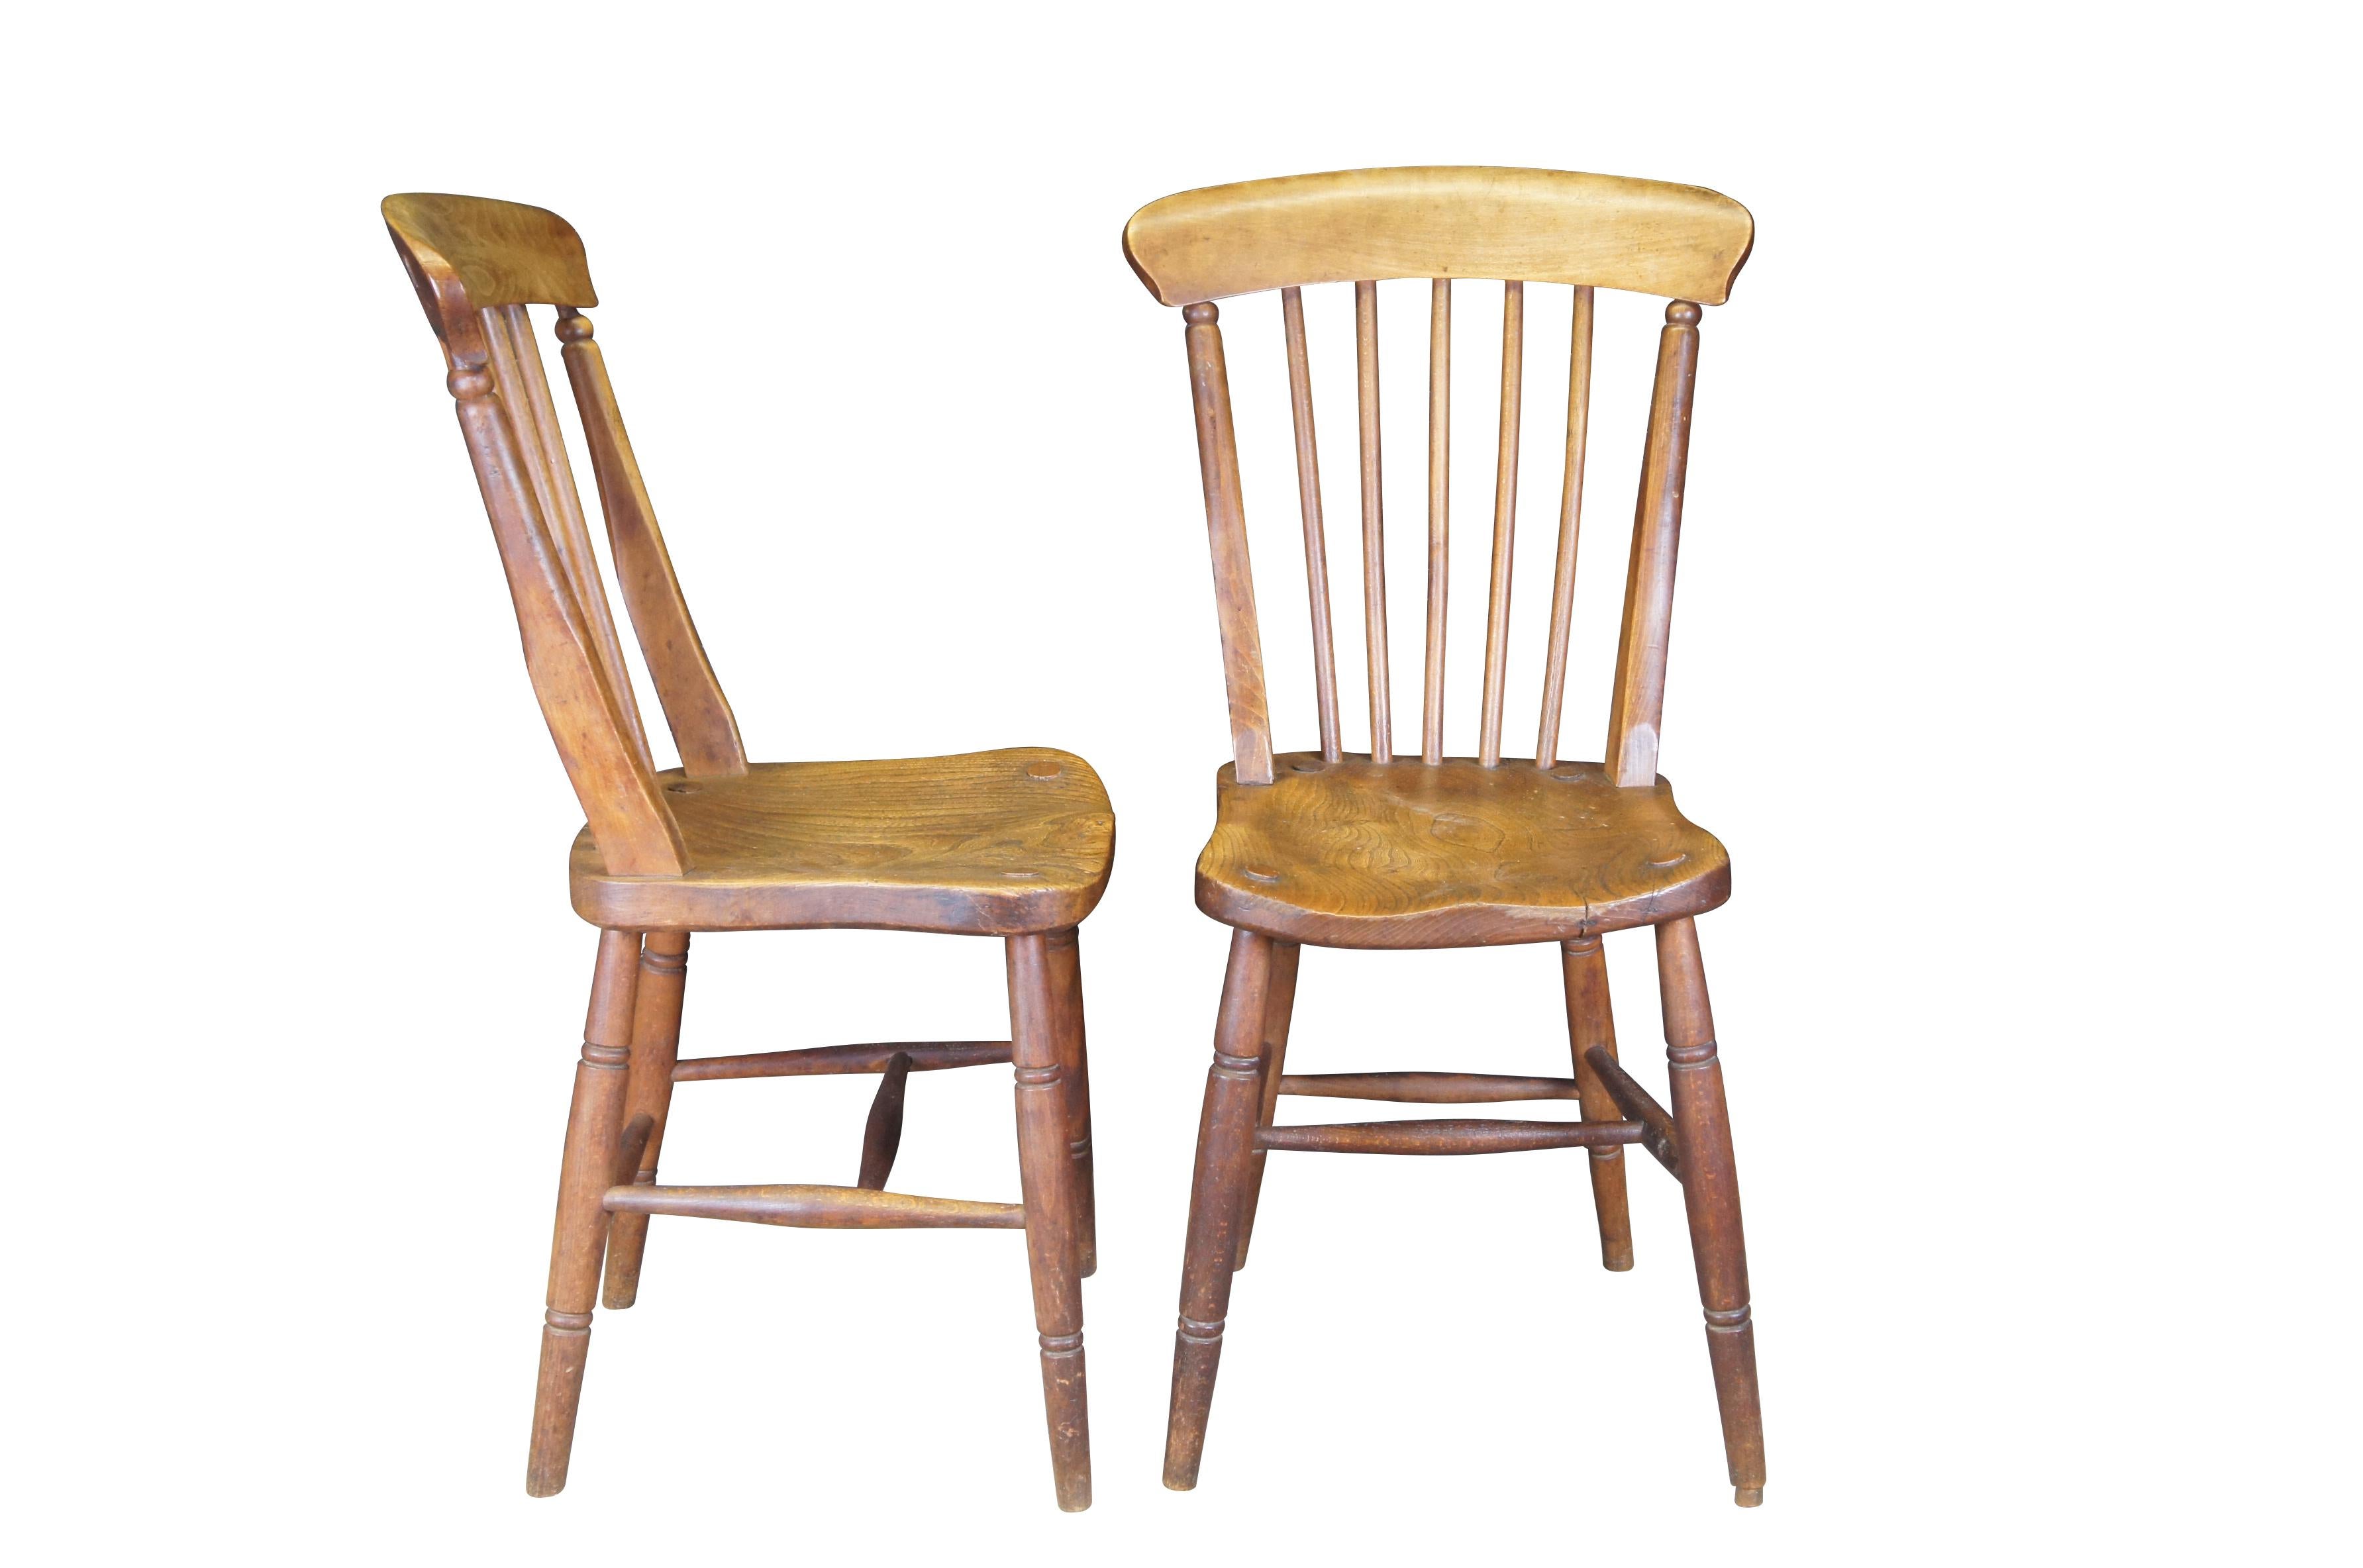 Six antique Glenister primitive elm dining chairs from Wycombe England.  Circa 19th Century.

The Thomas Glenister Company 
Temple End, High Wycombe, Buckinghamshire; chair maker (b. 1837-c.1891)

Glenister’s was founded by Daniel Glenister, a High